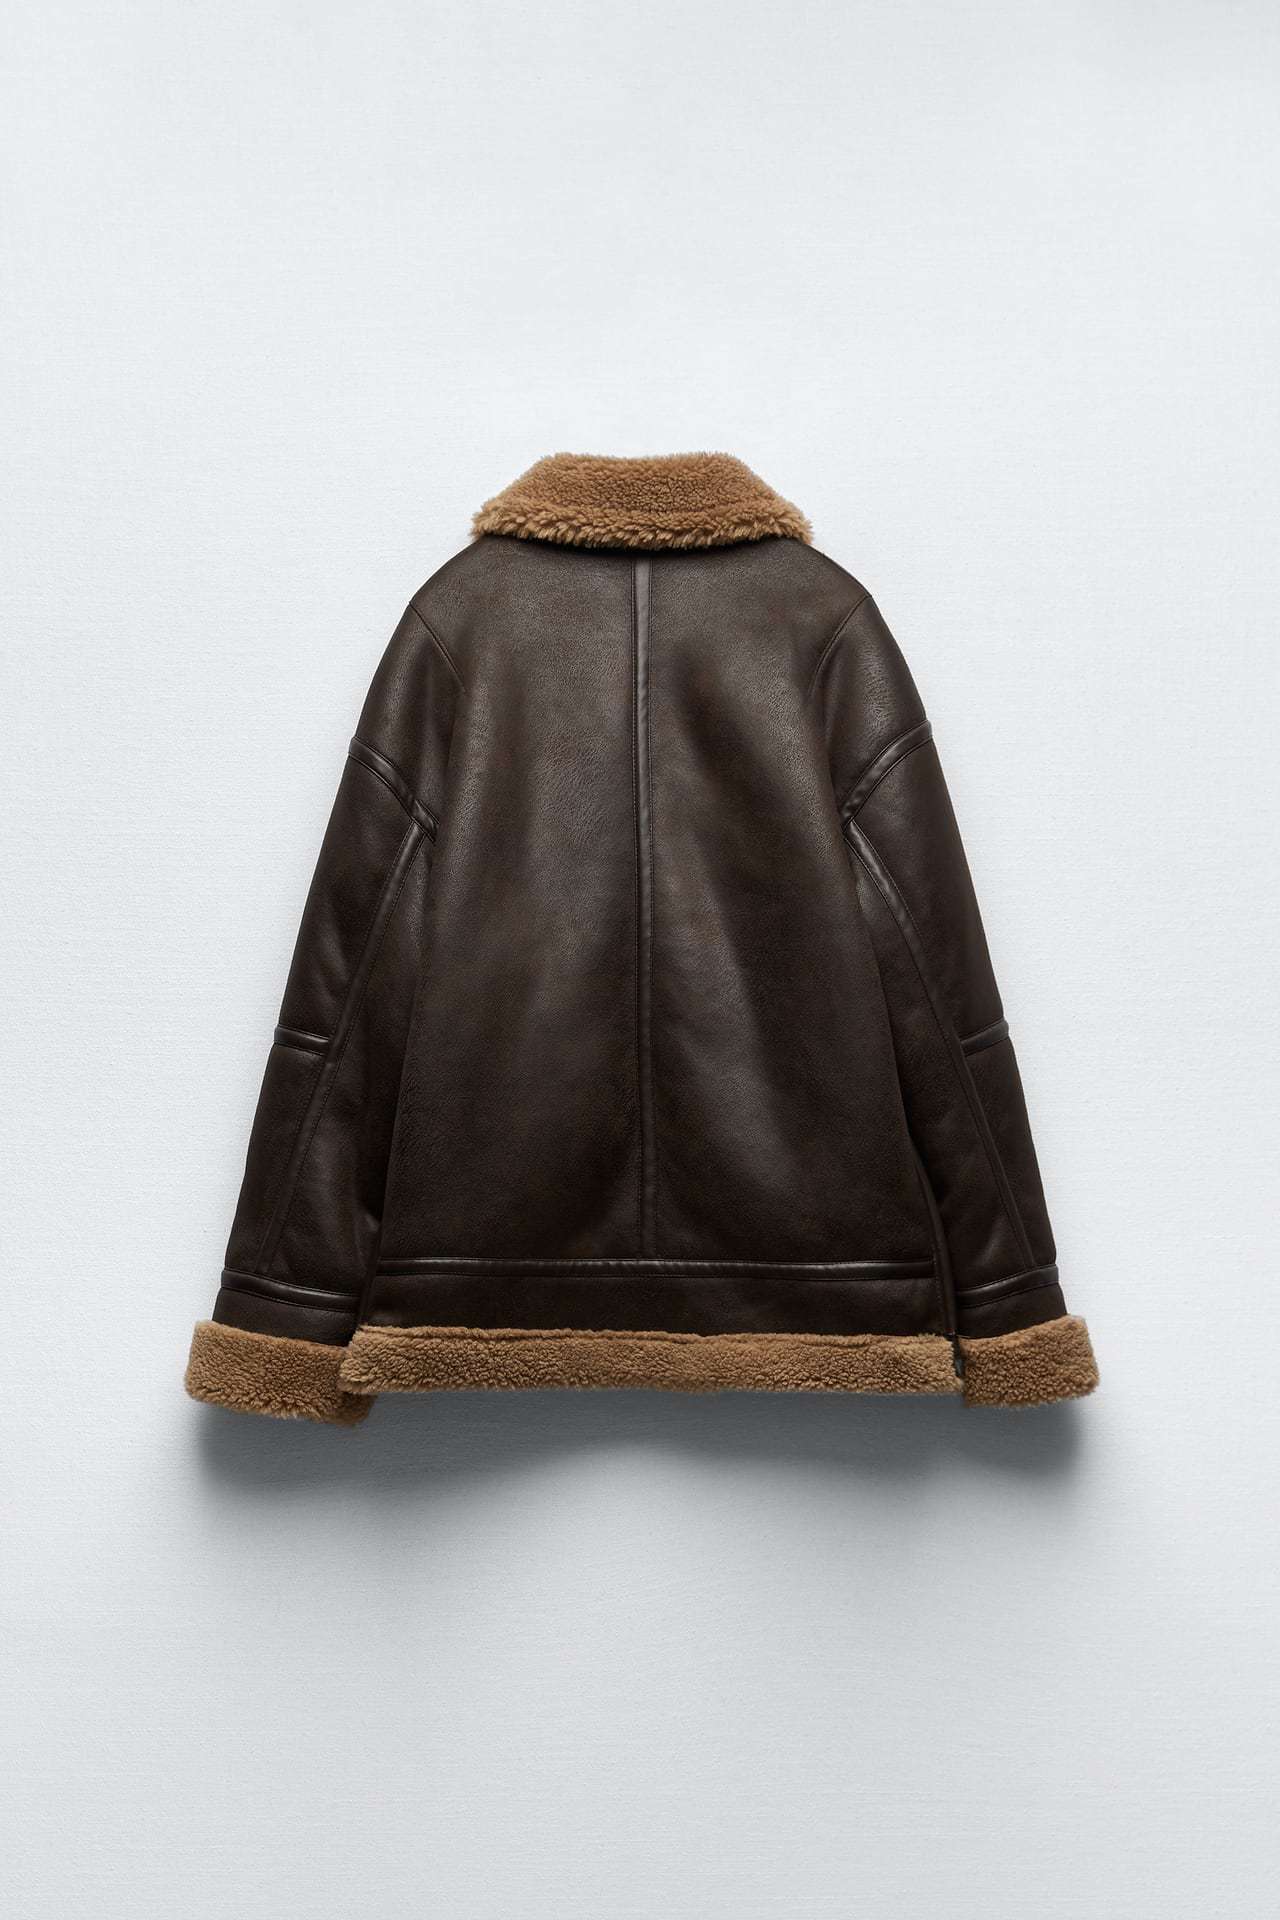 Women's Brown Leather Jacket with Lapel Collar